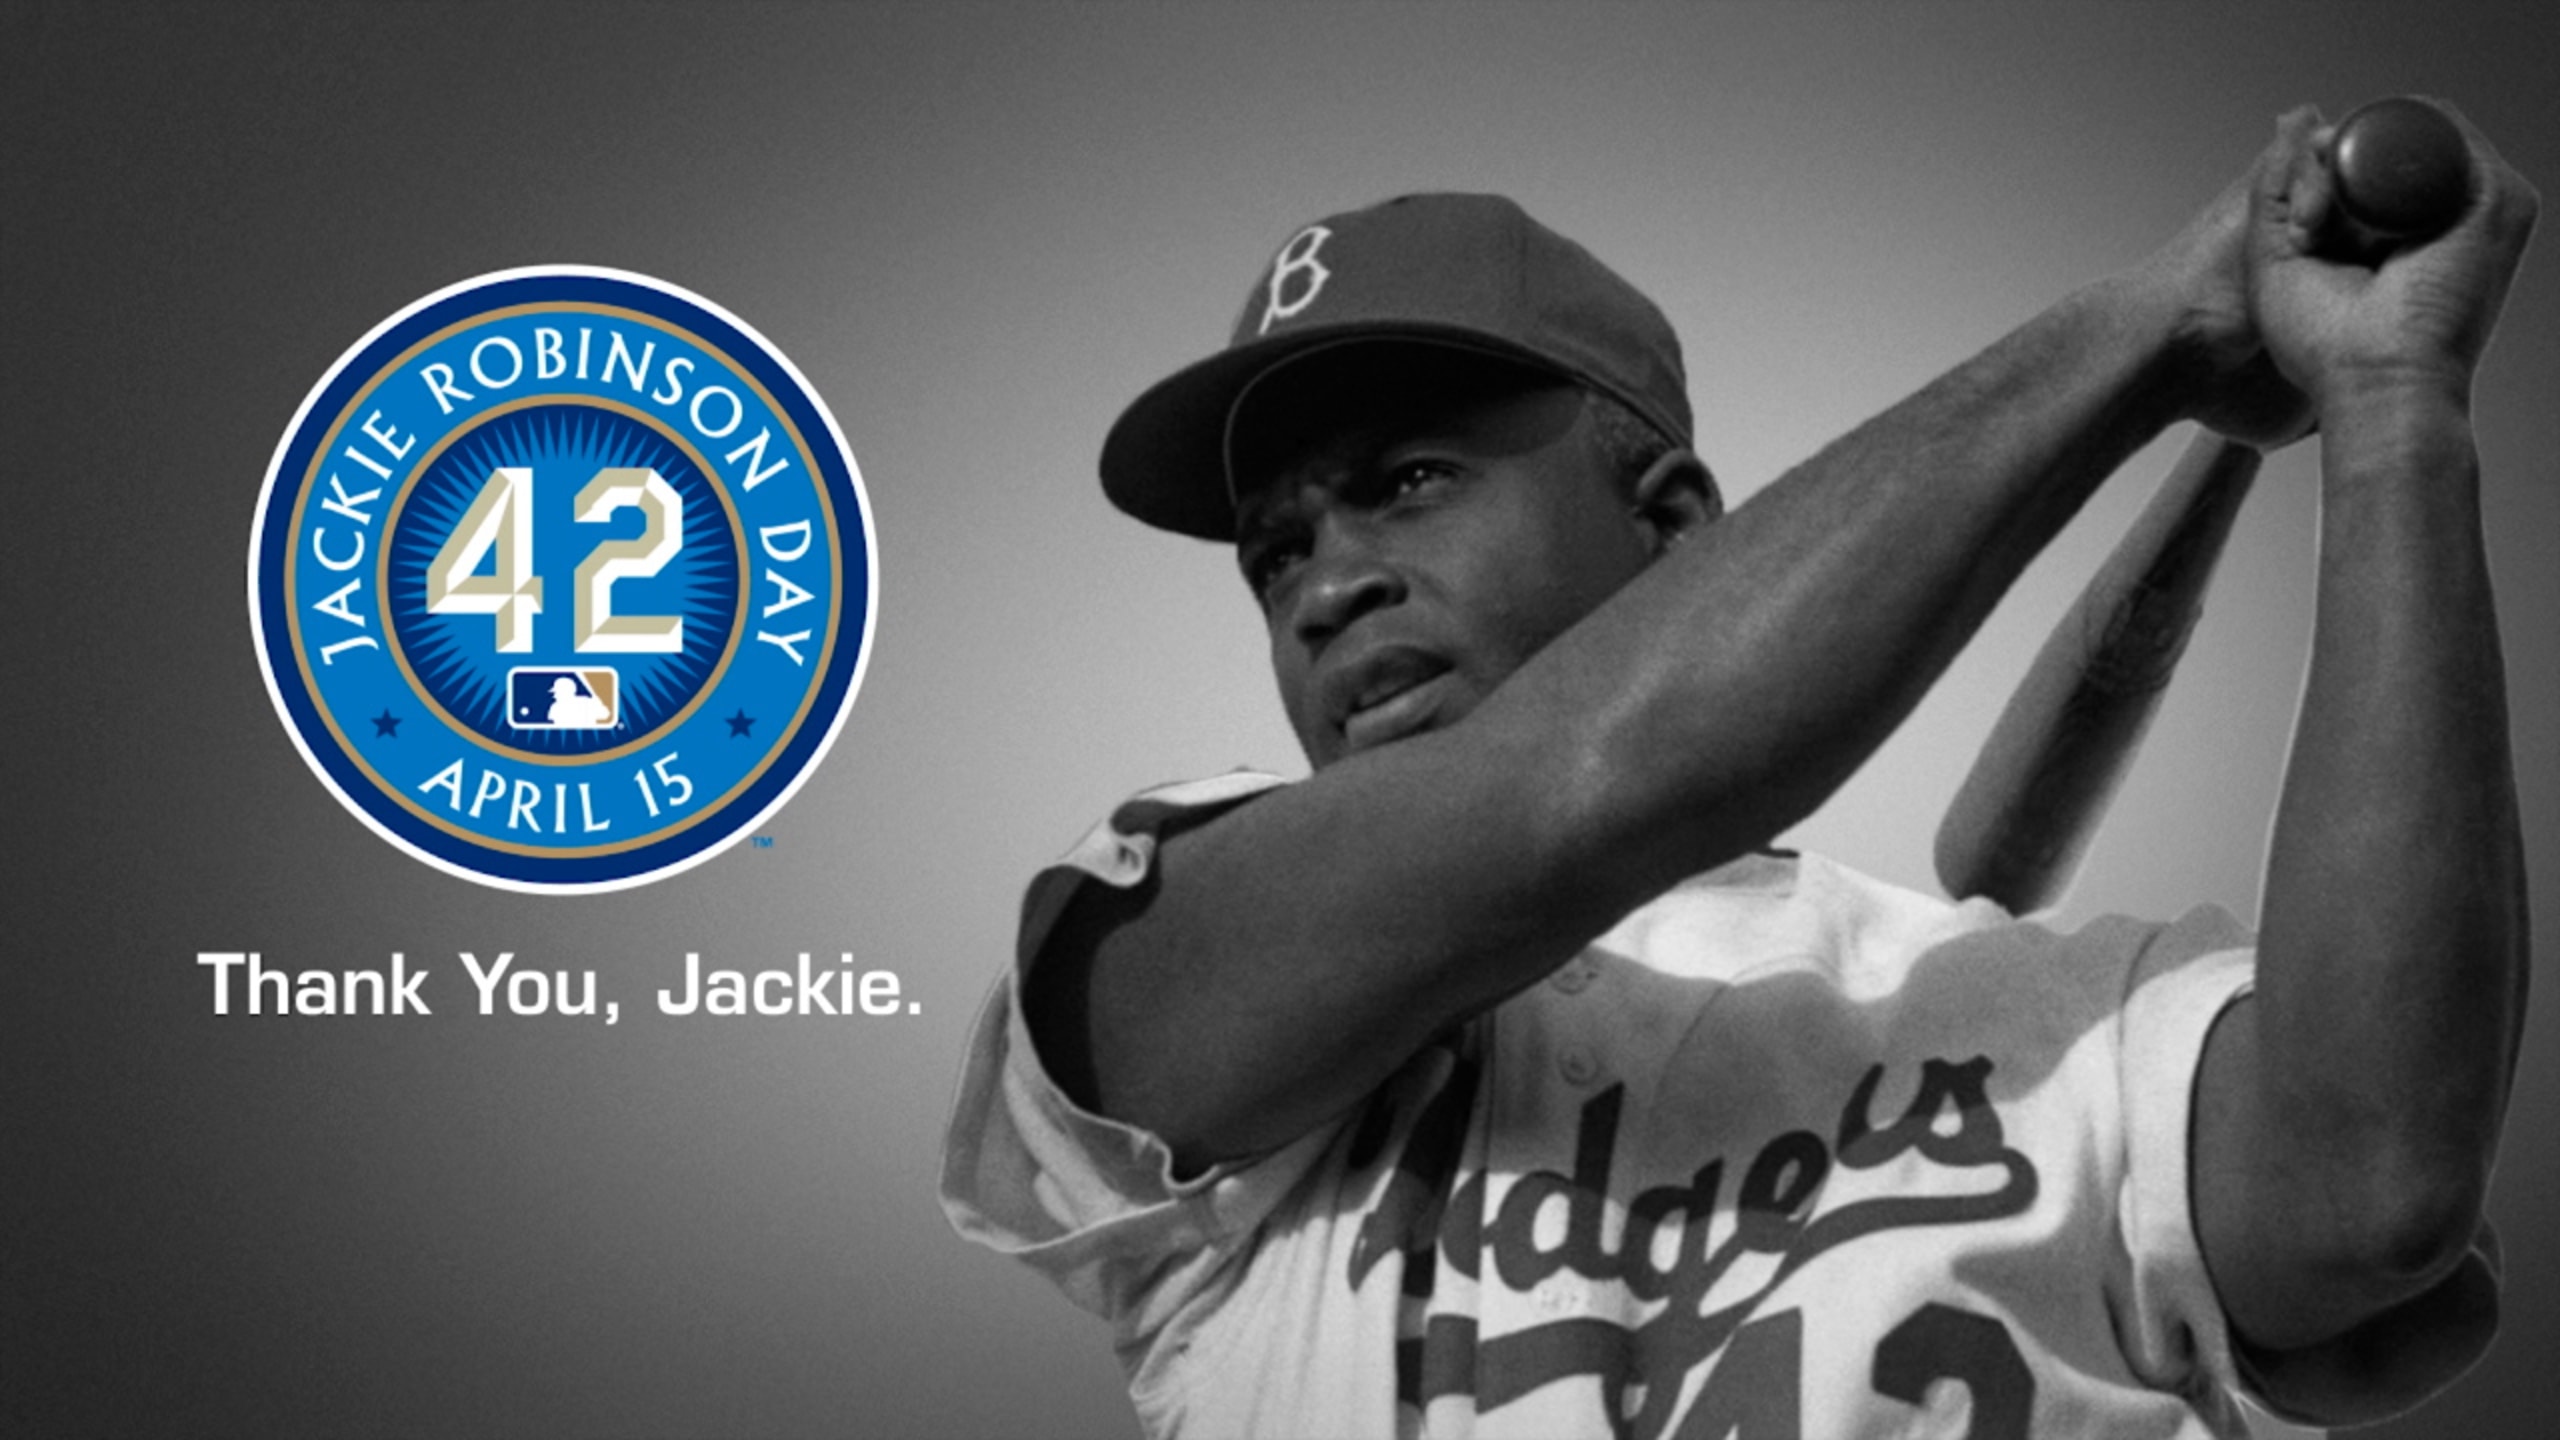 MLB on X: Every year on April 15, we celebrate Jackie Robinson